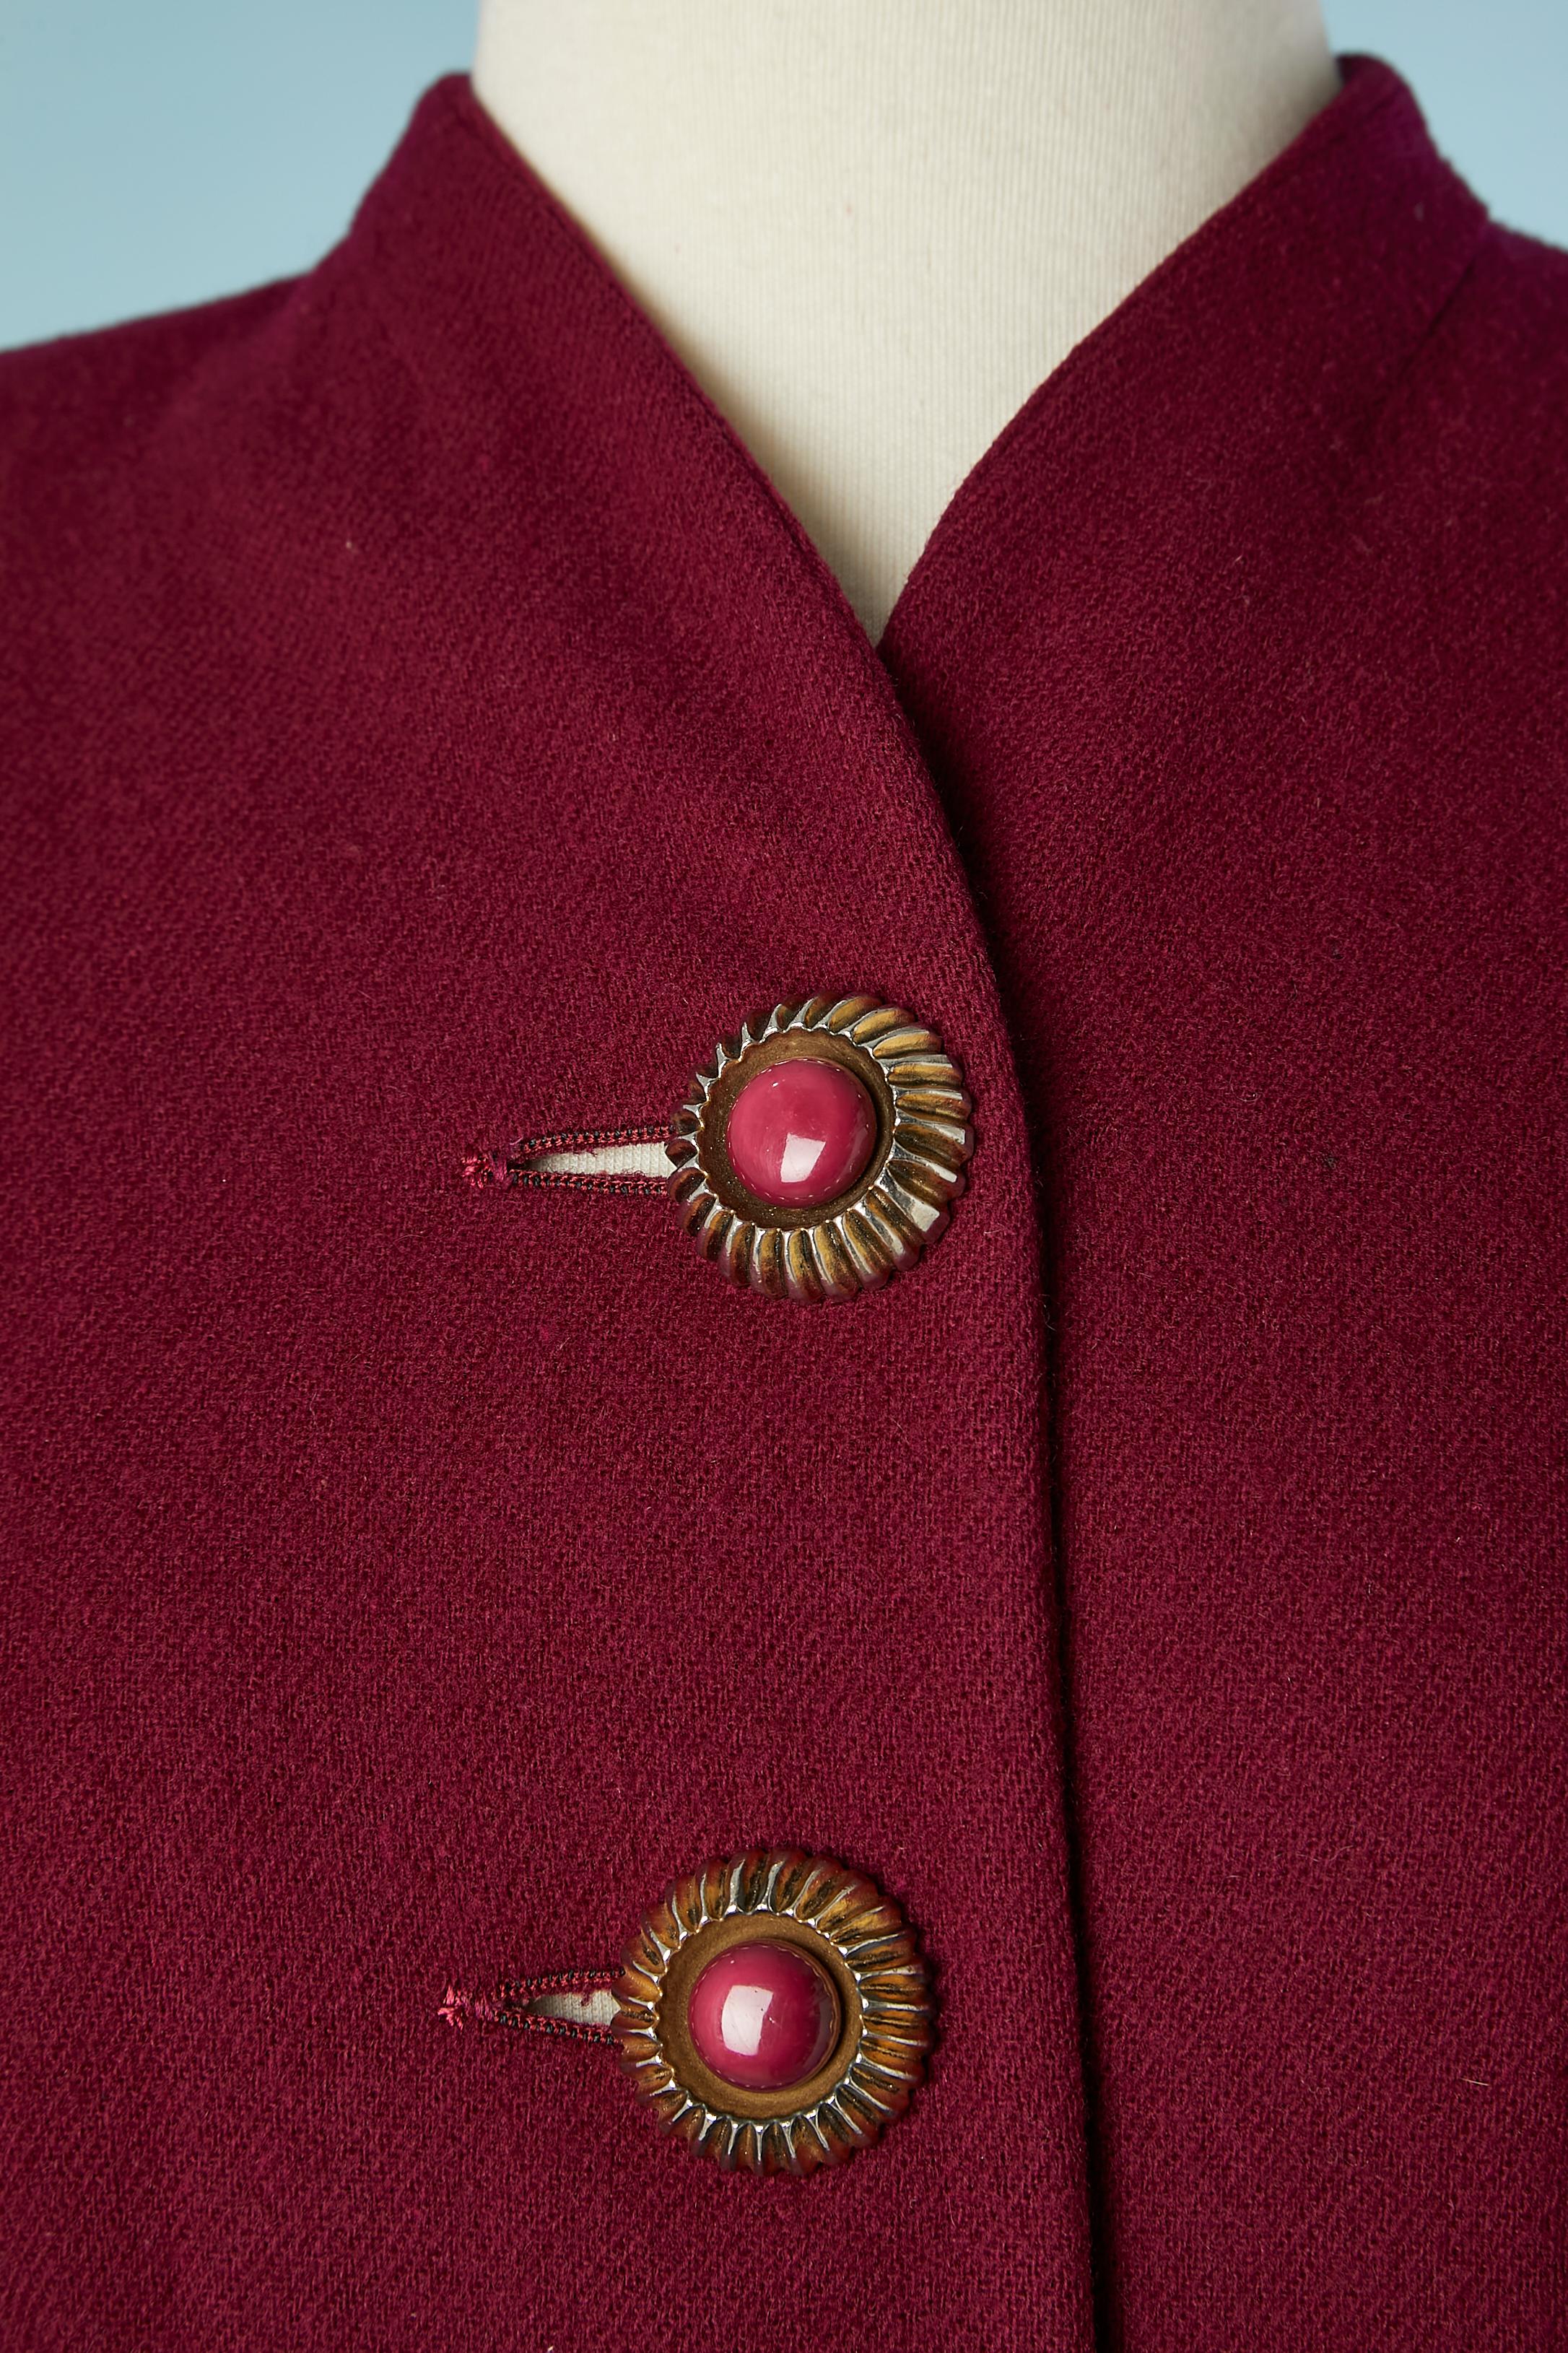 Burgundy skirt-suit in wool with jewellery button. Pale pink rayon lining. Cut work and 